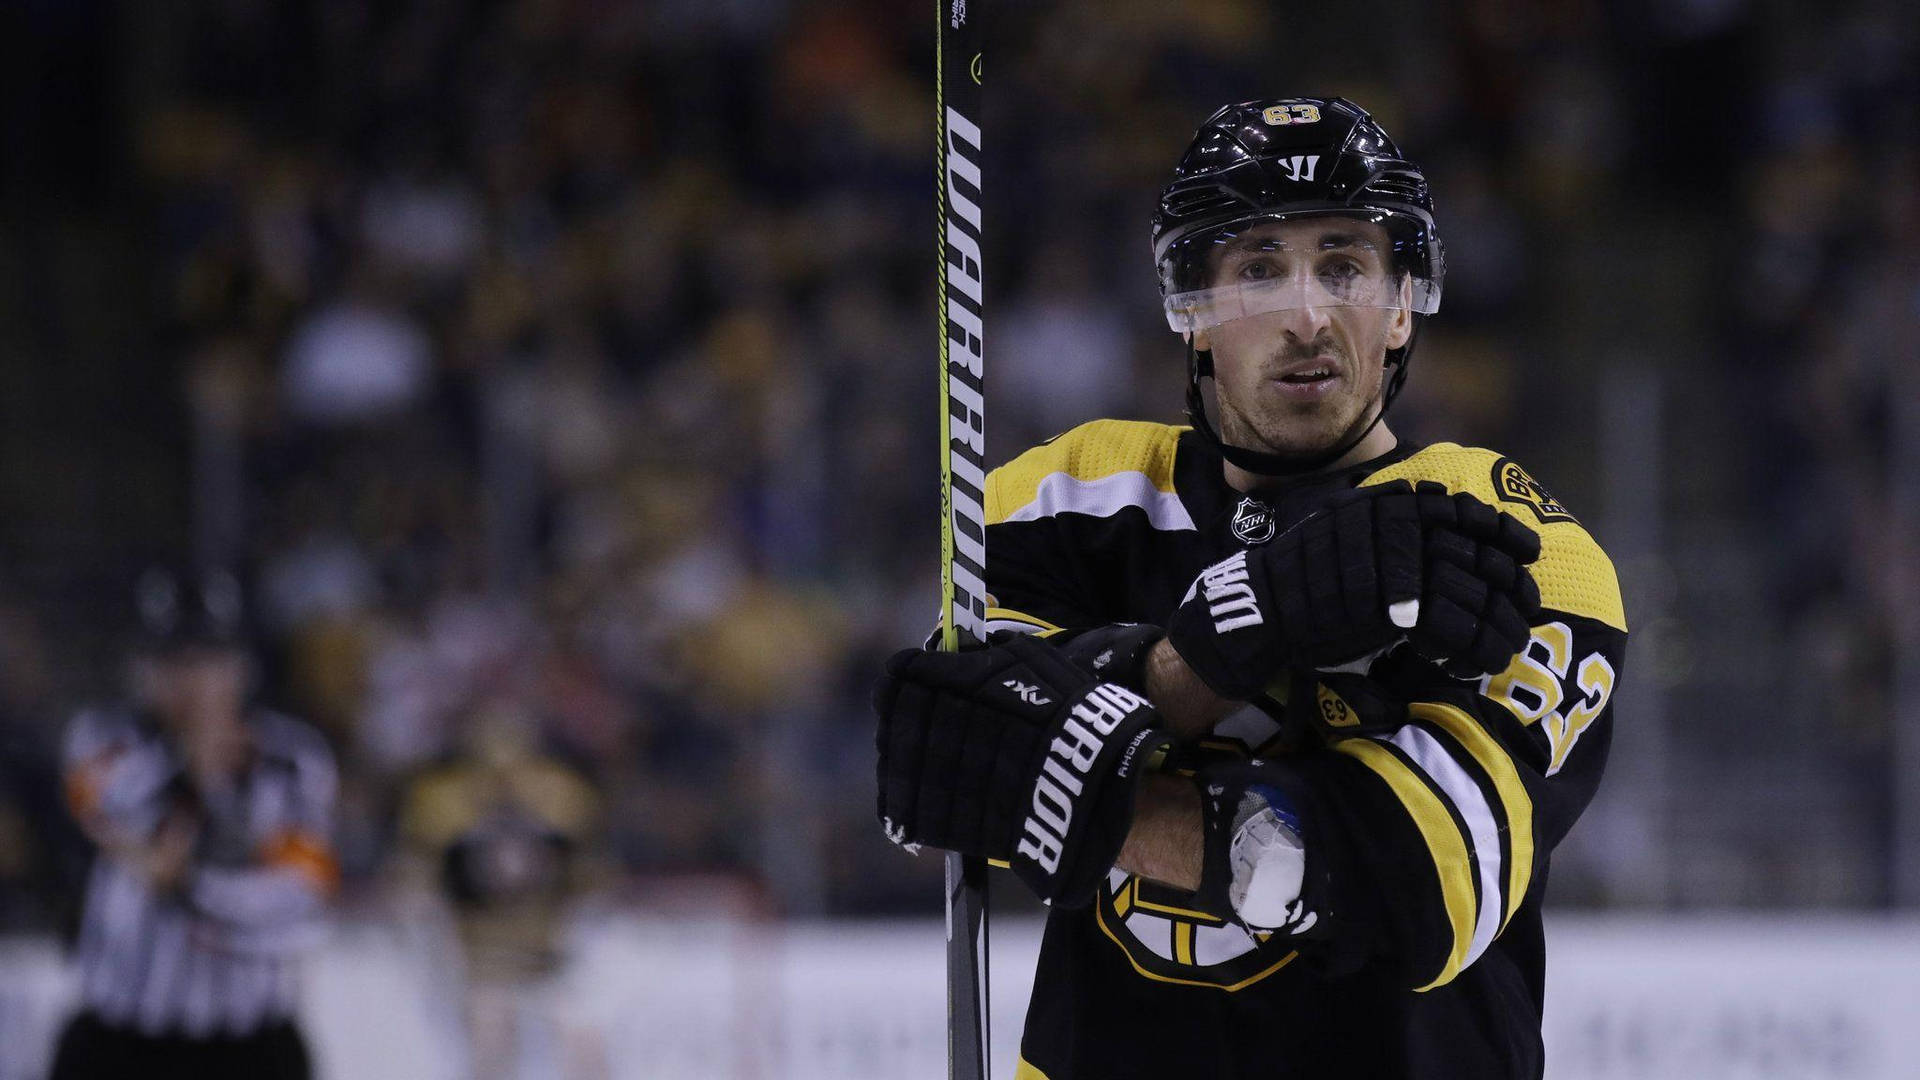 Caption: Brad Marchand: The Shining Star Of Nhl